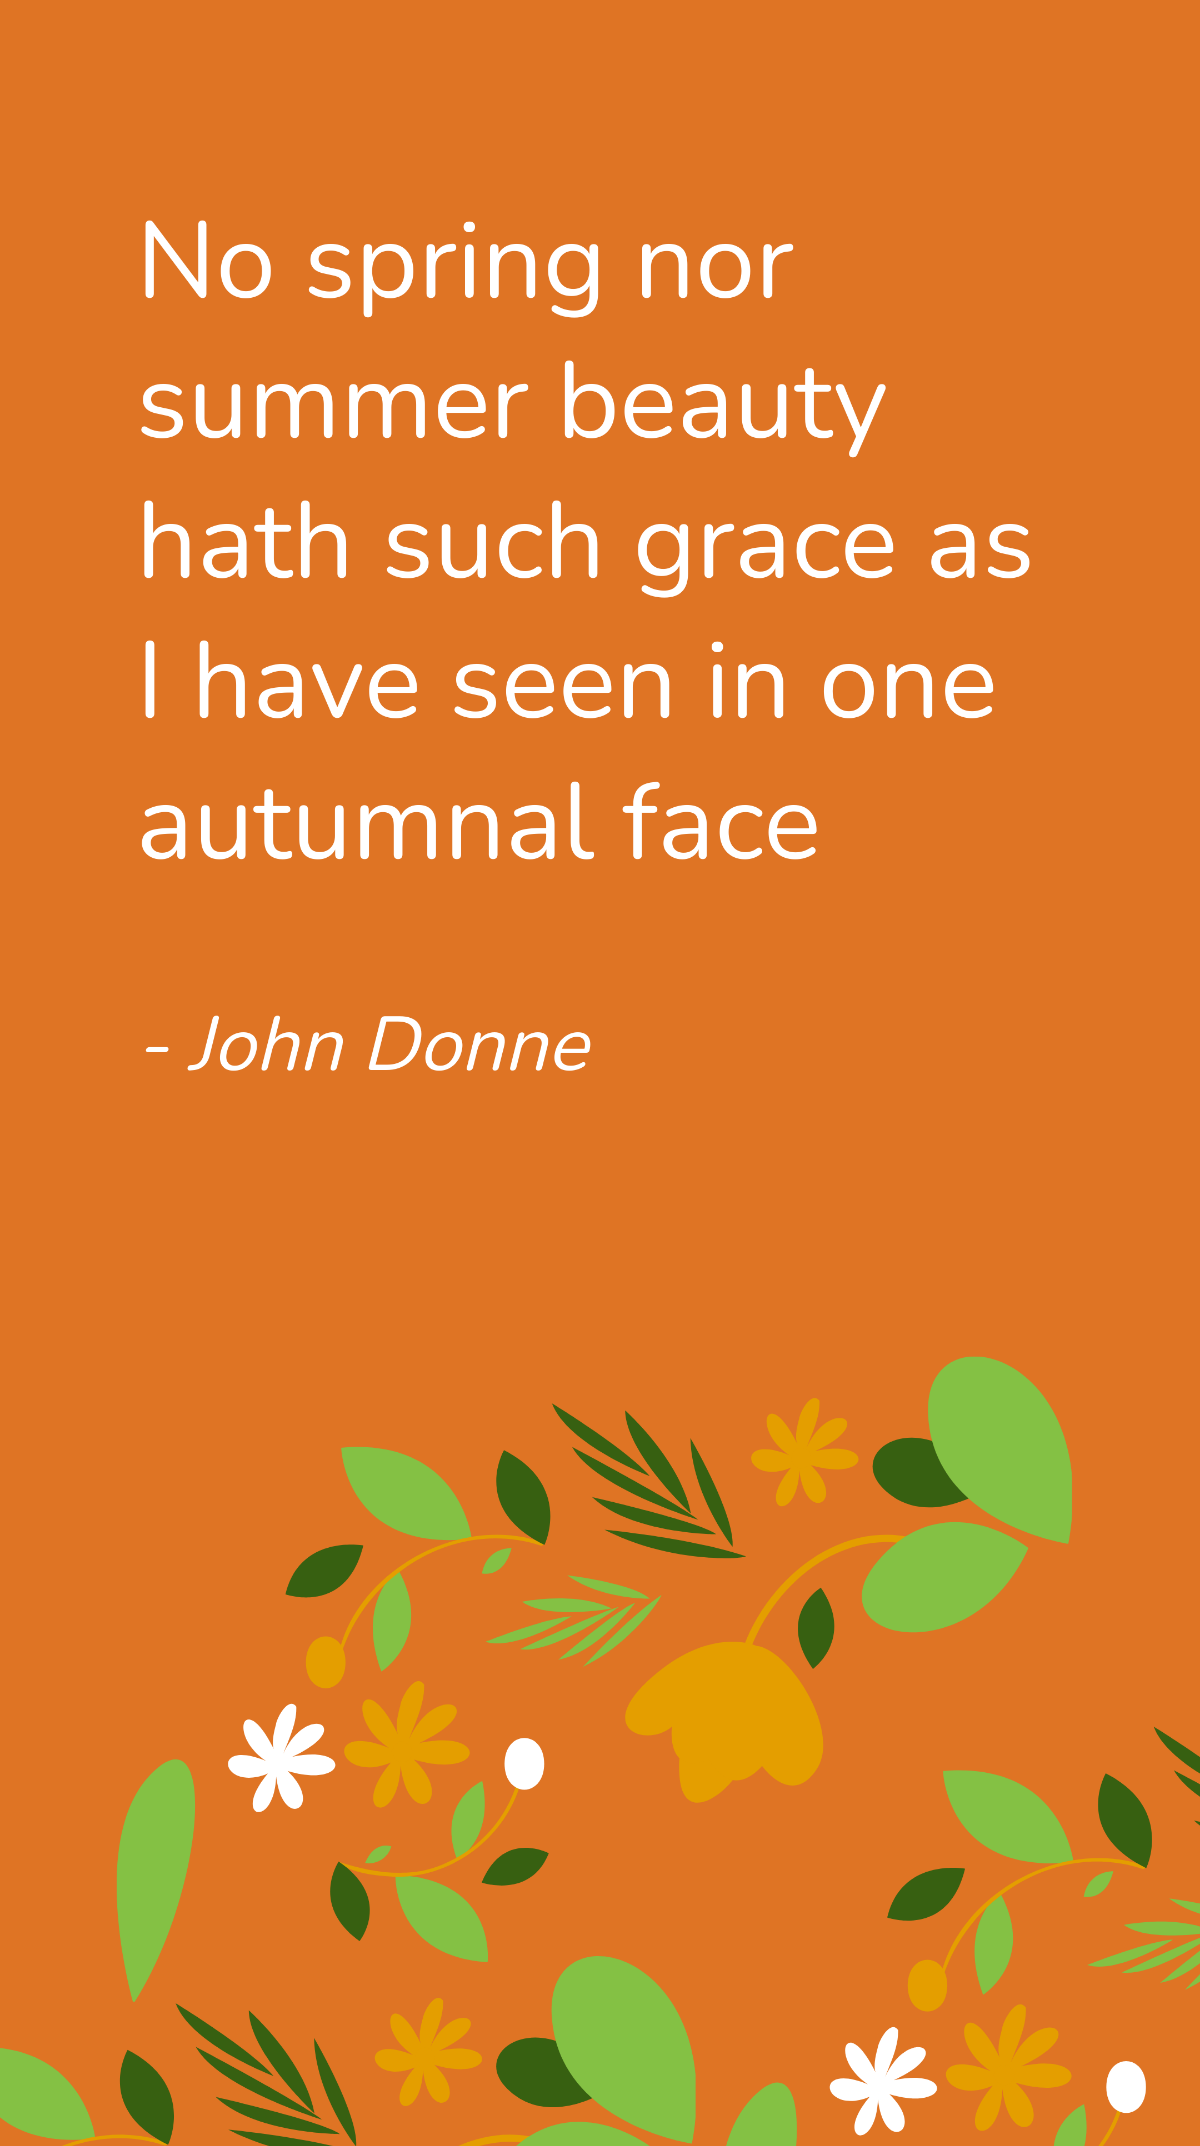 John Donne - No spring nor summer beauty hath such grace as I have seen in one autumnal face Template